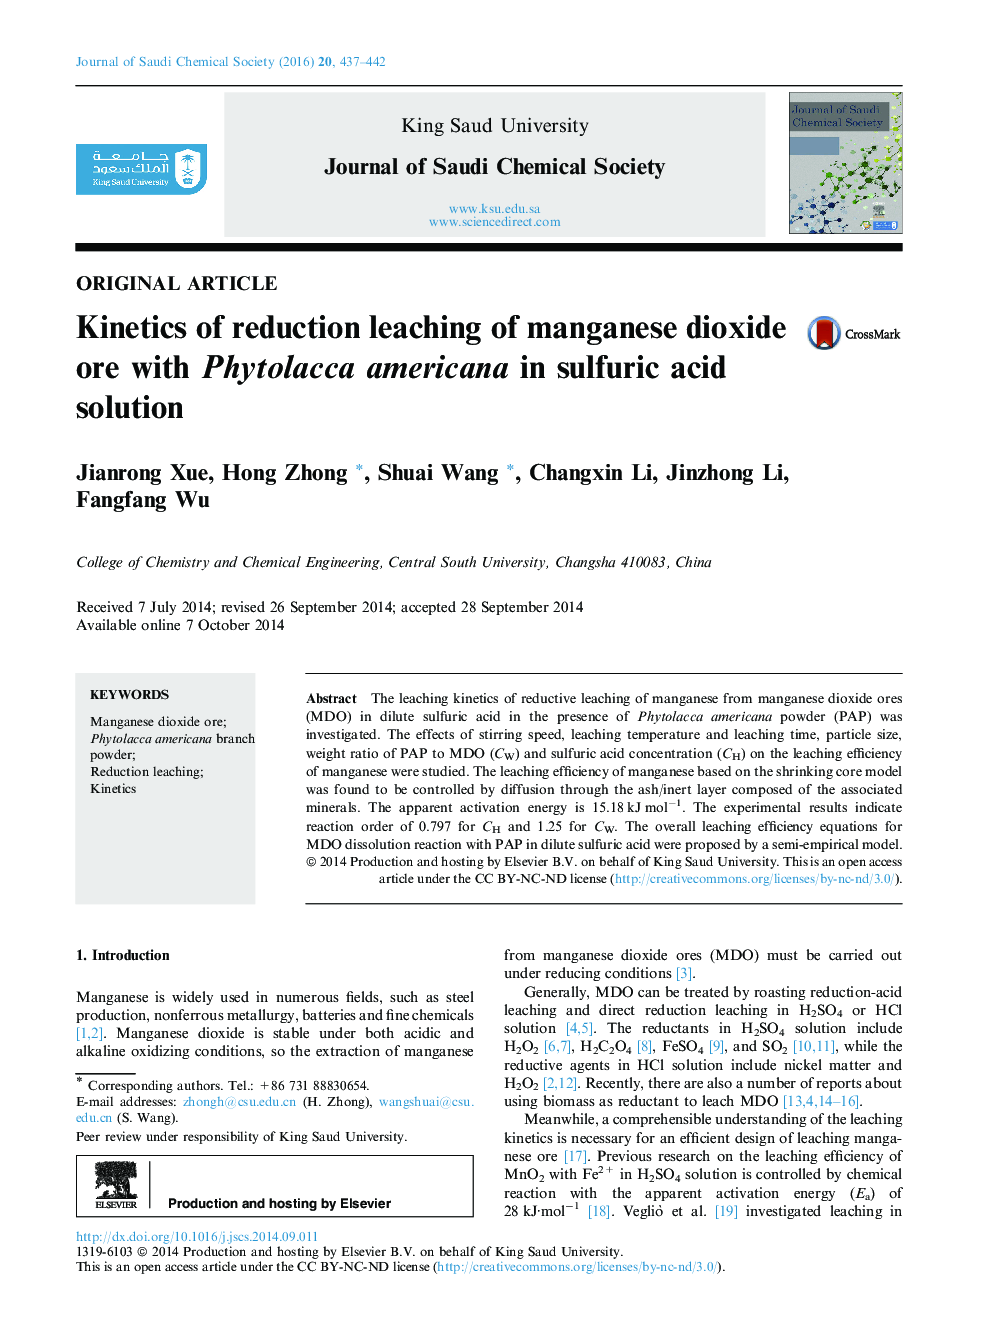 Kinetics of reduction leaching of manganese dioxide ore with Phytolacca americana in sulfuric acid solution 